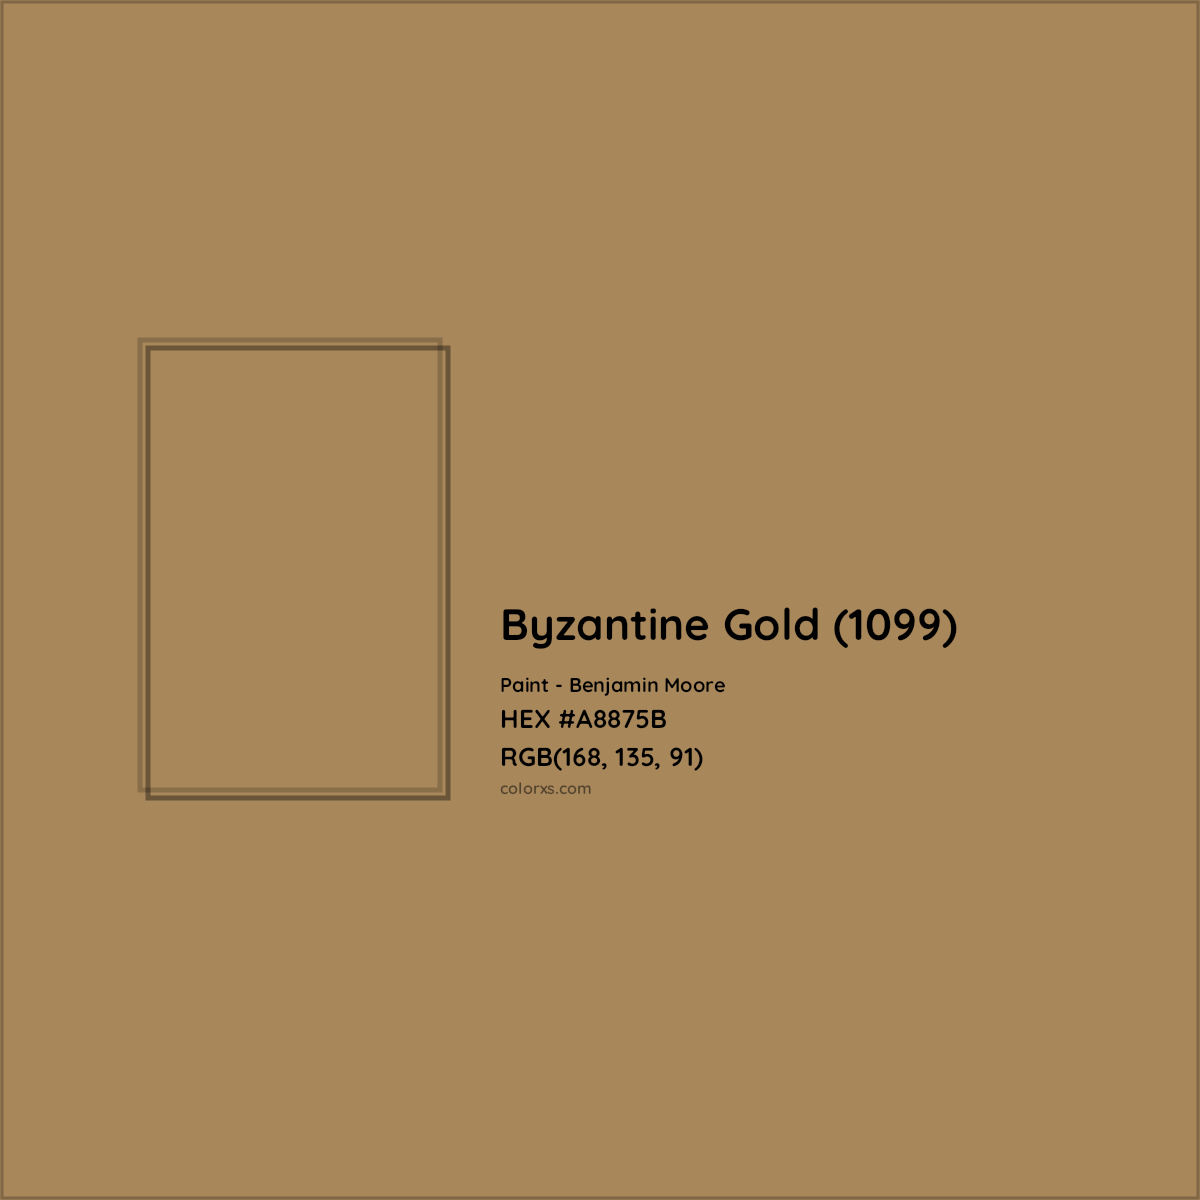 HEX #A8875B Byzantine Gold (1099) Paint Benjamin Moore - Color Code